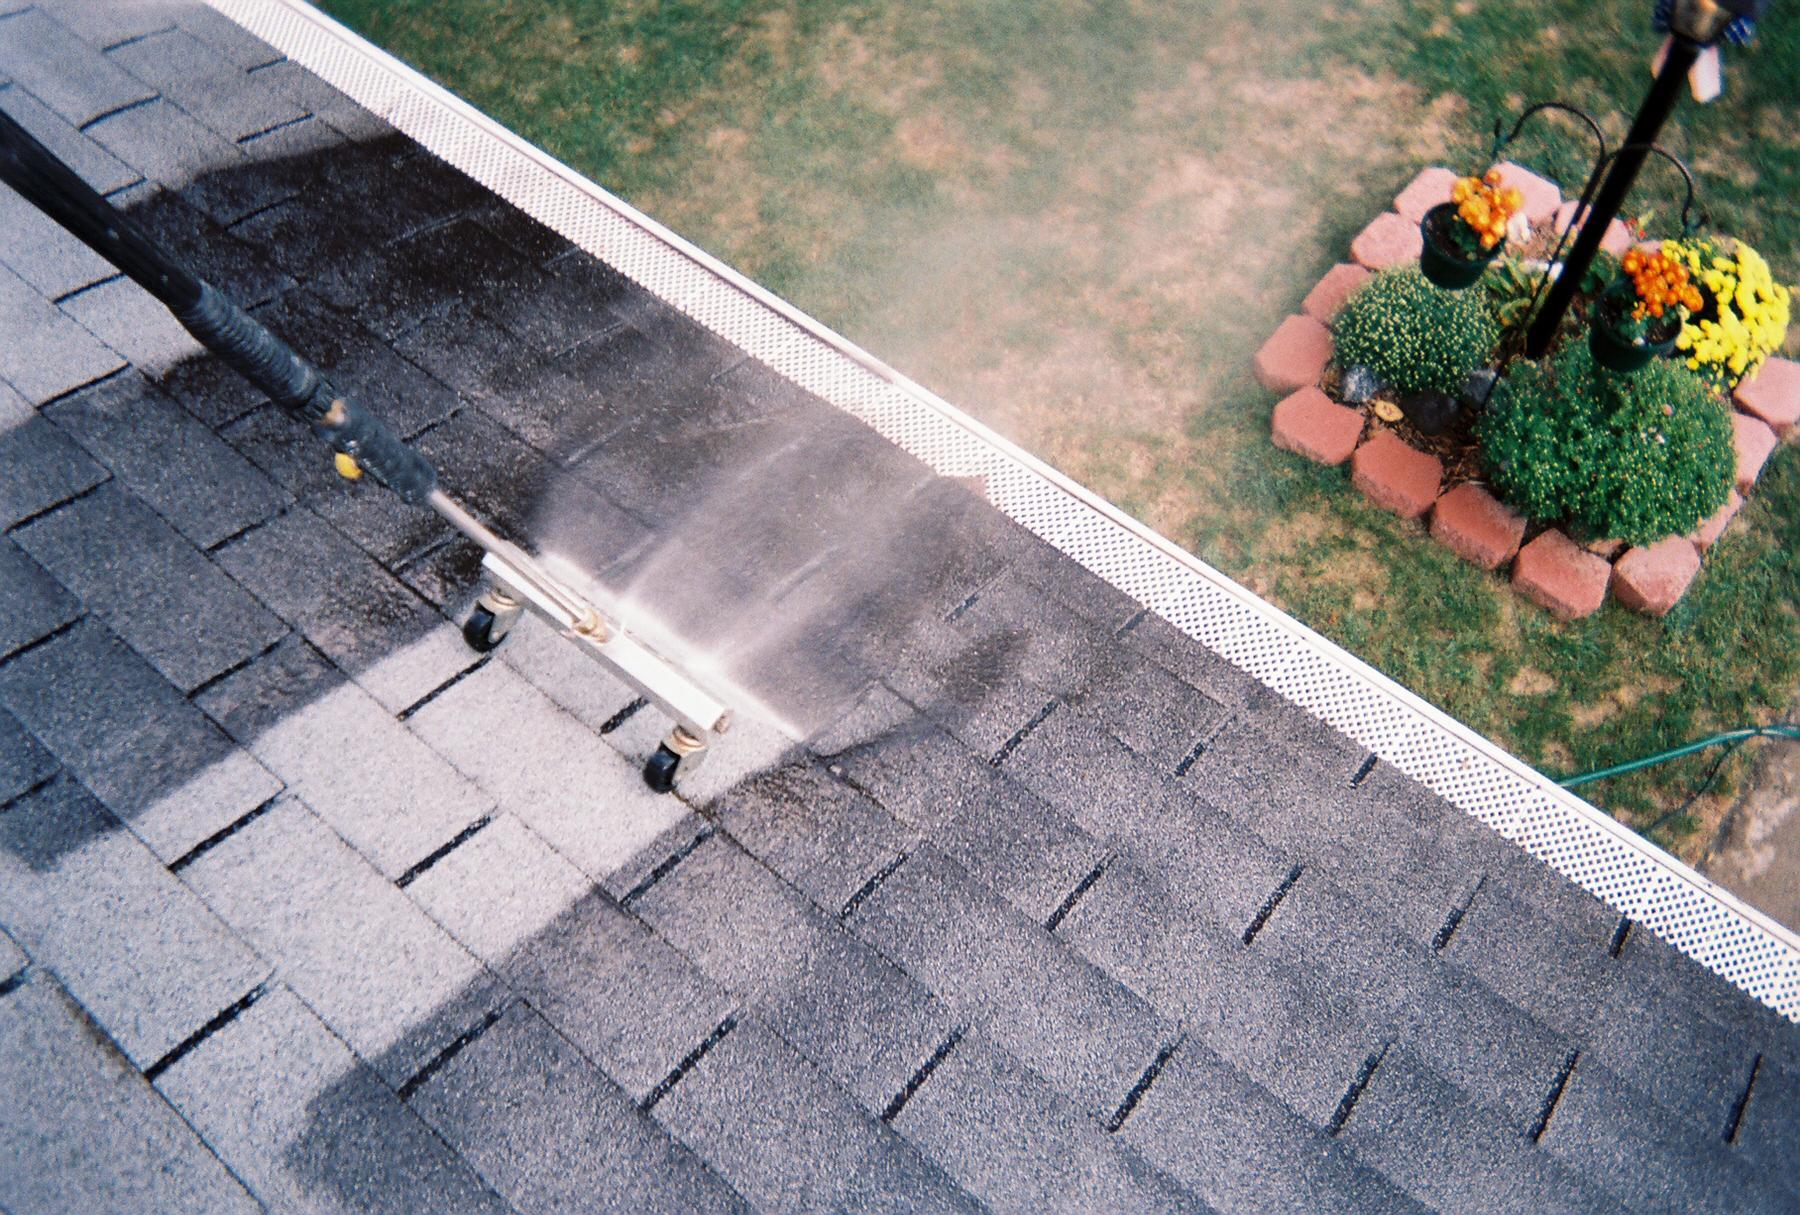 Renew Your Roof's Beauty with Top-Notch Surrey Roof Cleaning